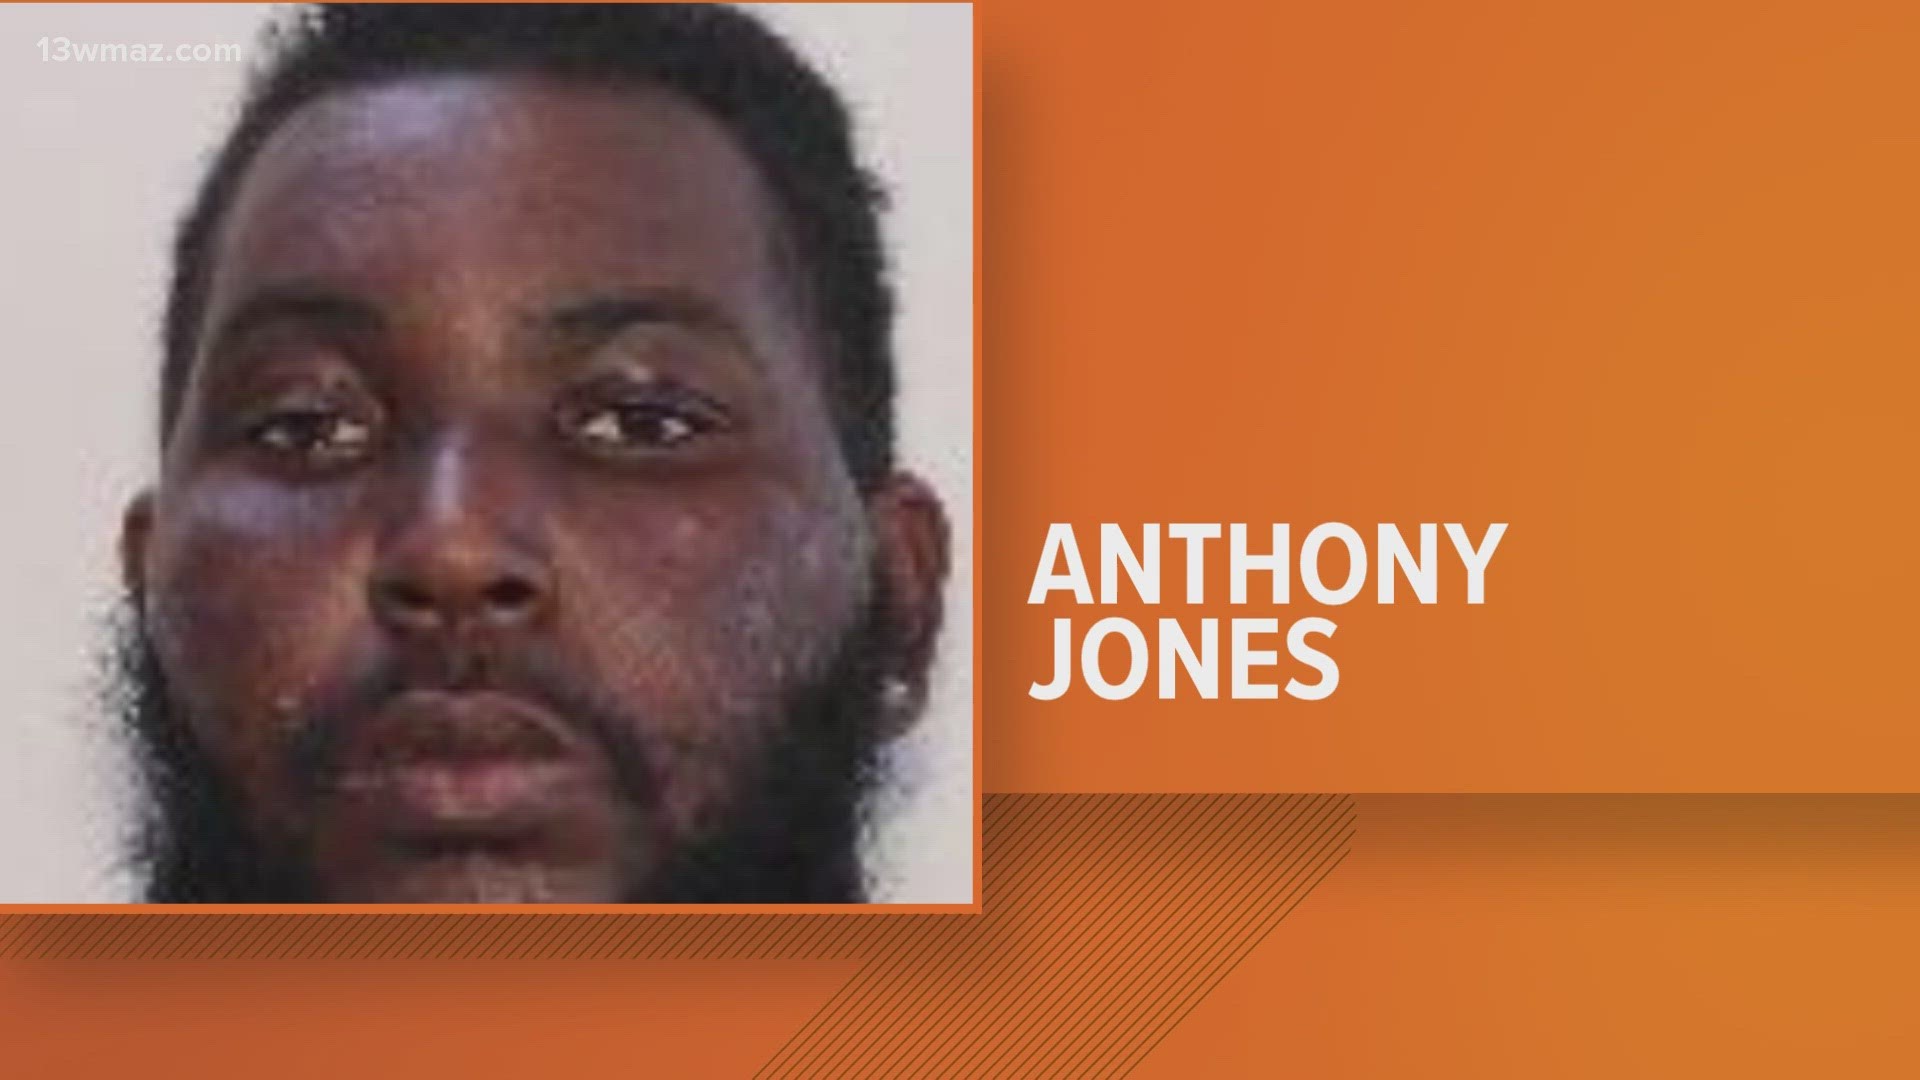 In a release, they said 26-year-old Anthony Jerome Jones is wanted for felony murder and aggravated assault.